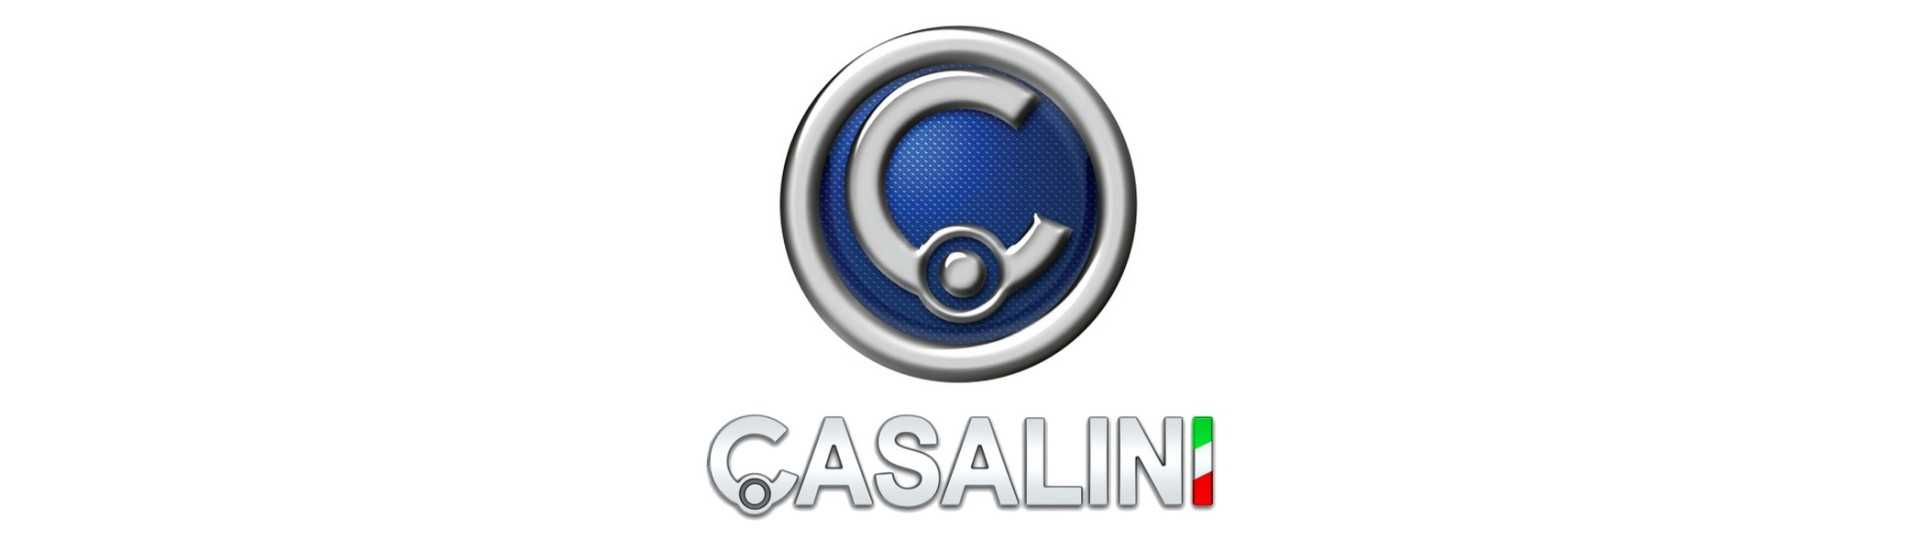 Potentiometer at best price for car without a permit Casalini